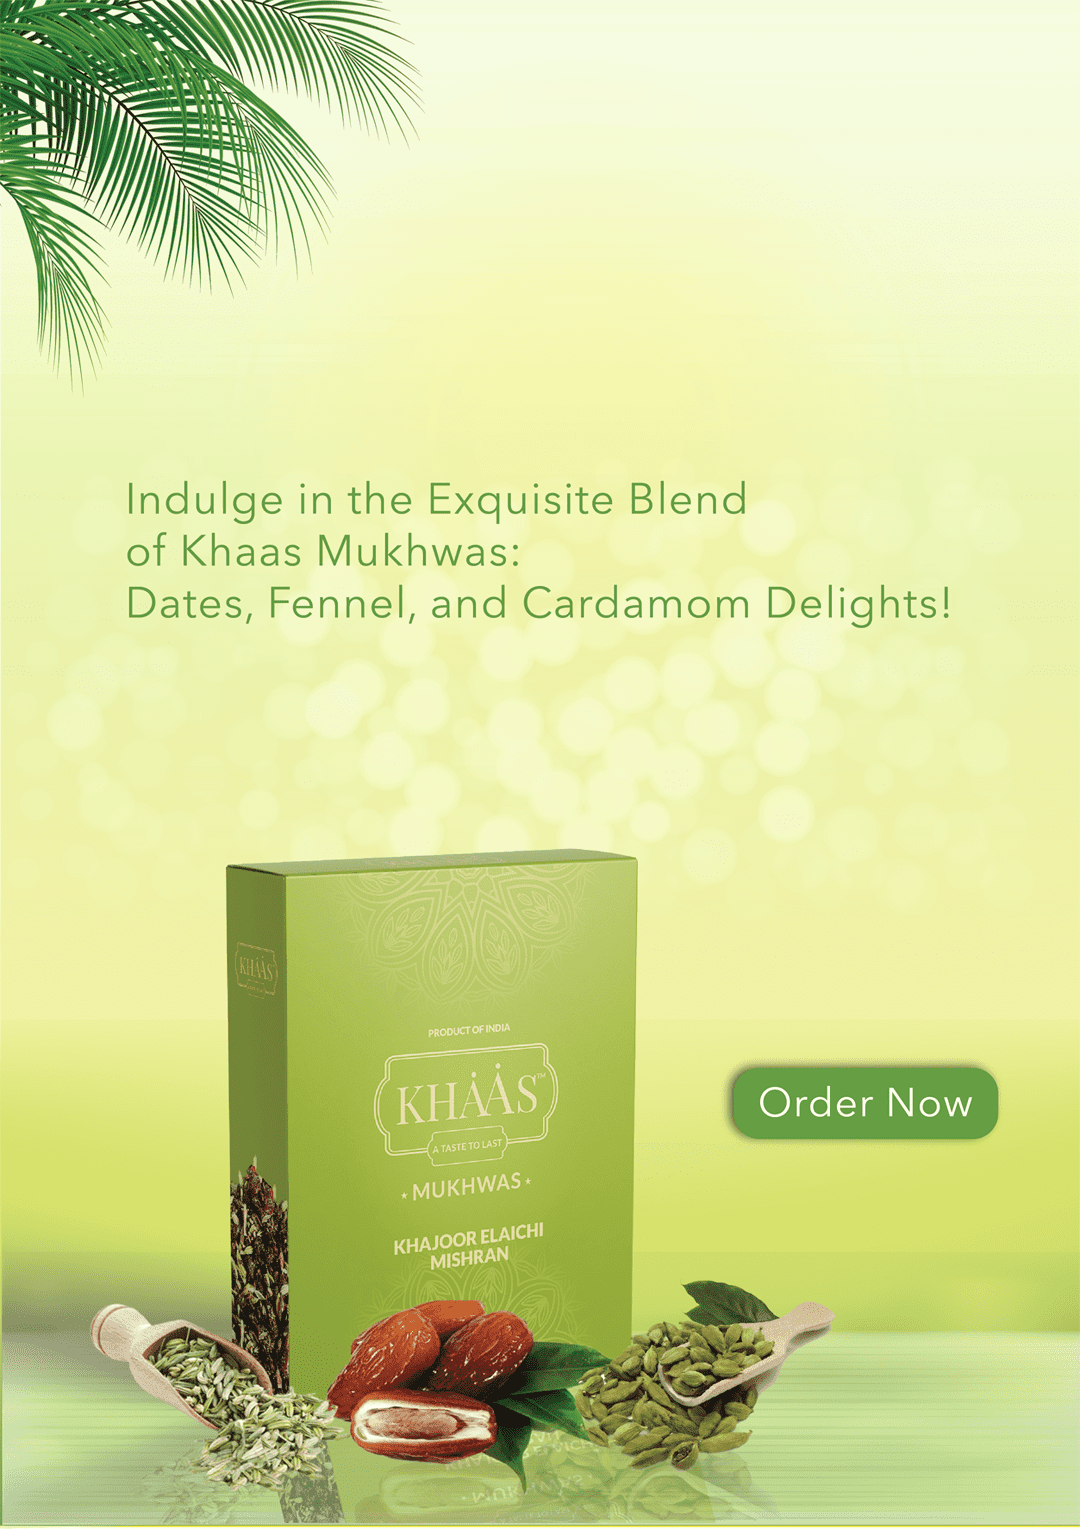 Indulge the Exiquisite Blend